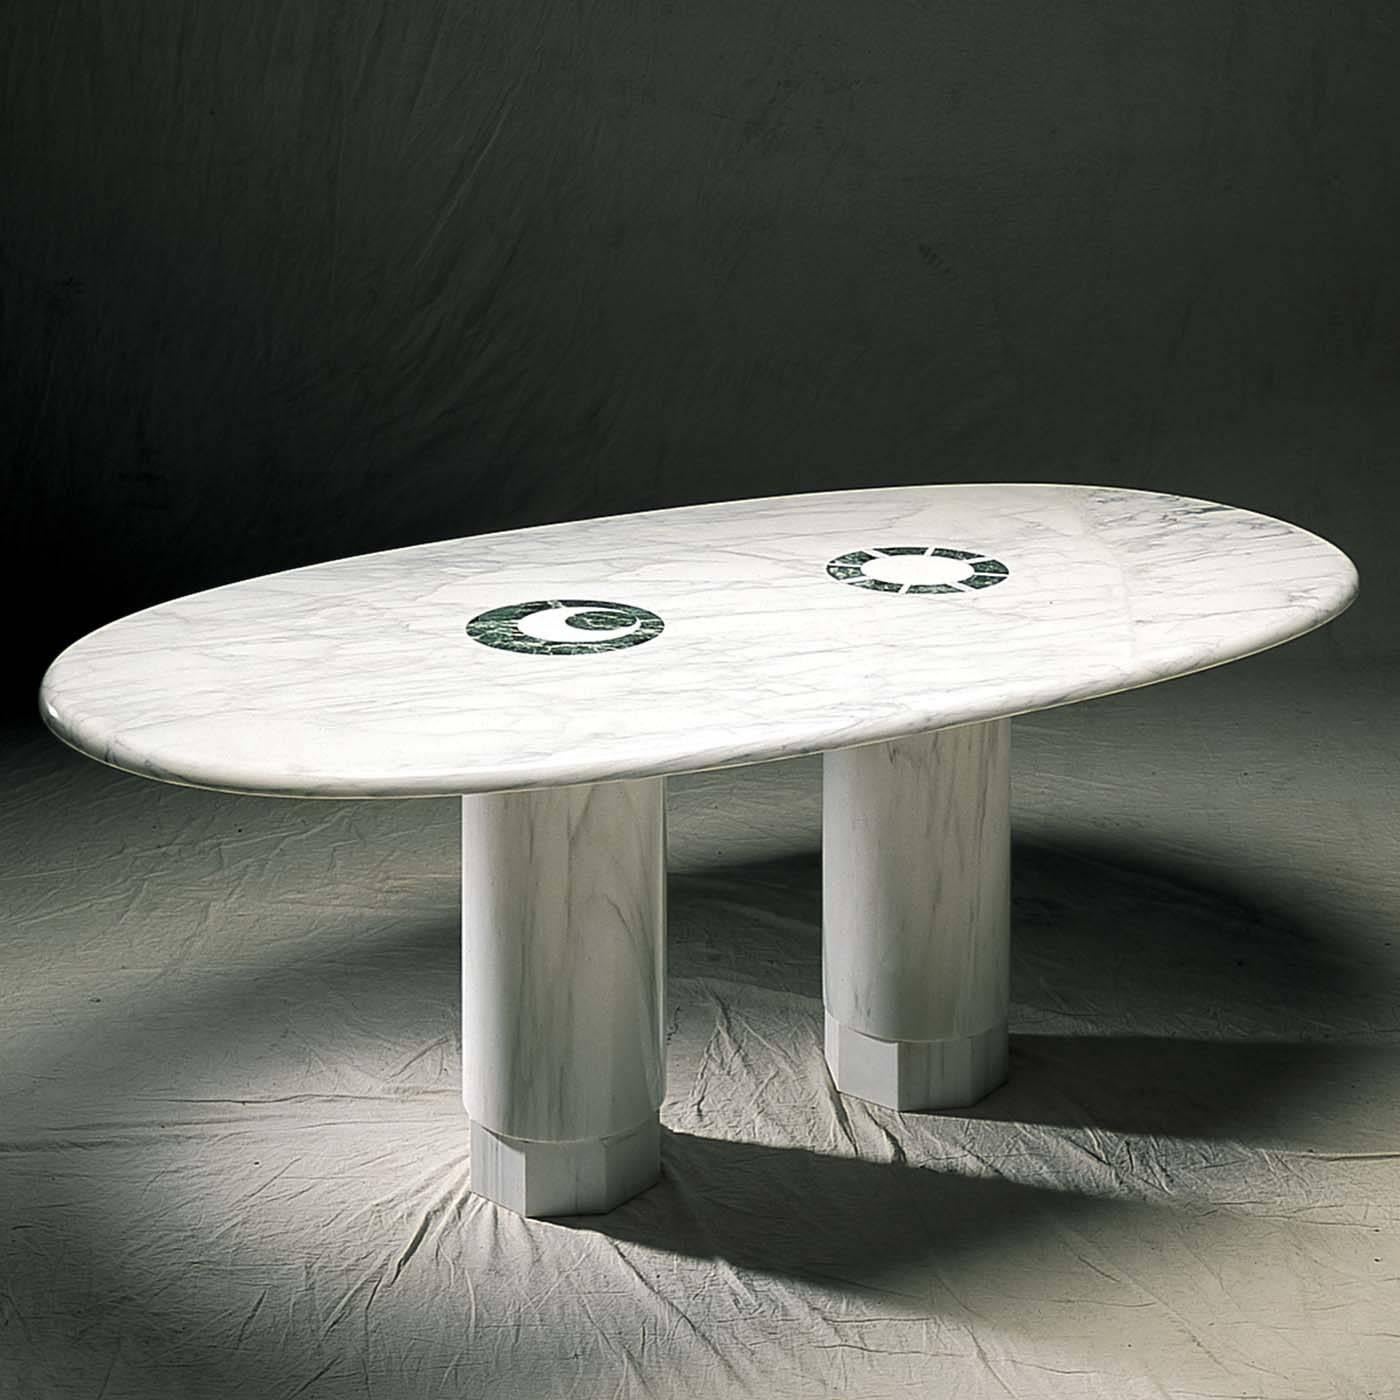 A timeless design by Adolfo Natalini for a dining table that combines classic materials with modern silhouette. The entire structure is made of Carrara marble and features a stunning oval top resting on two smooth pillar-shaped supports with an